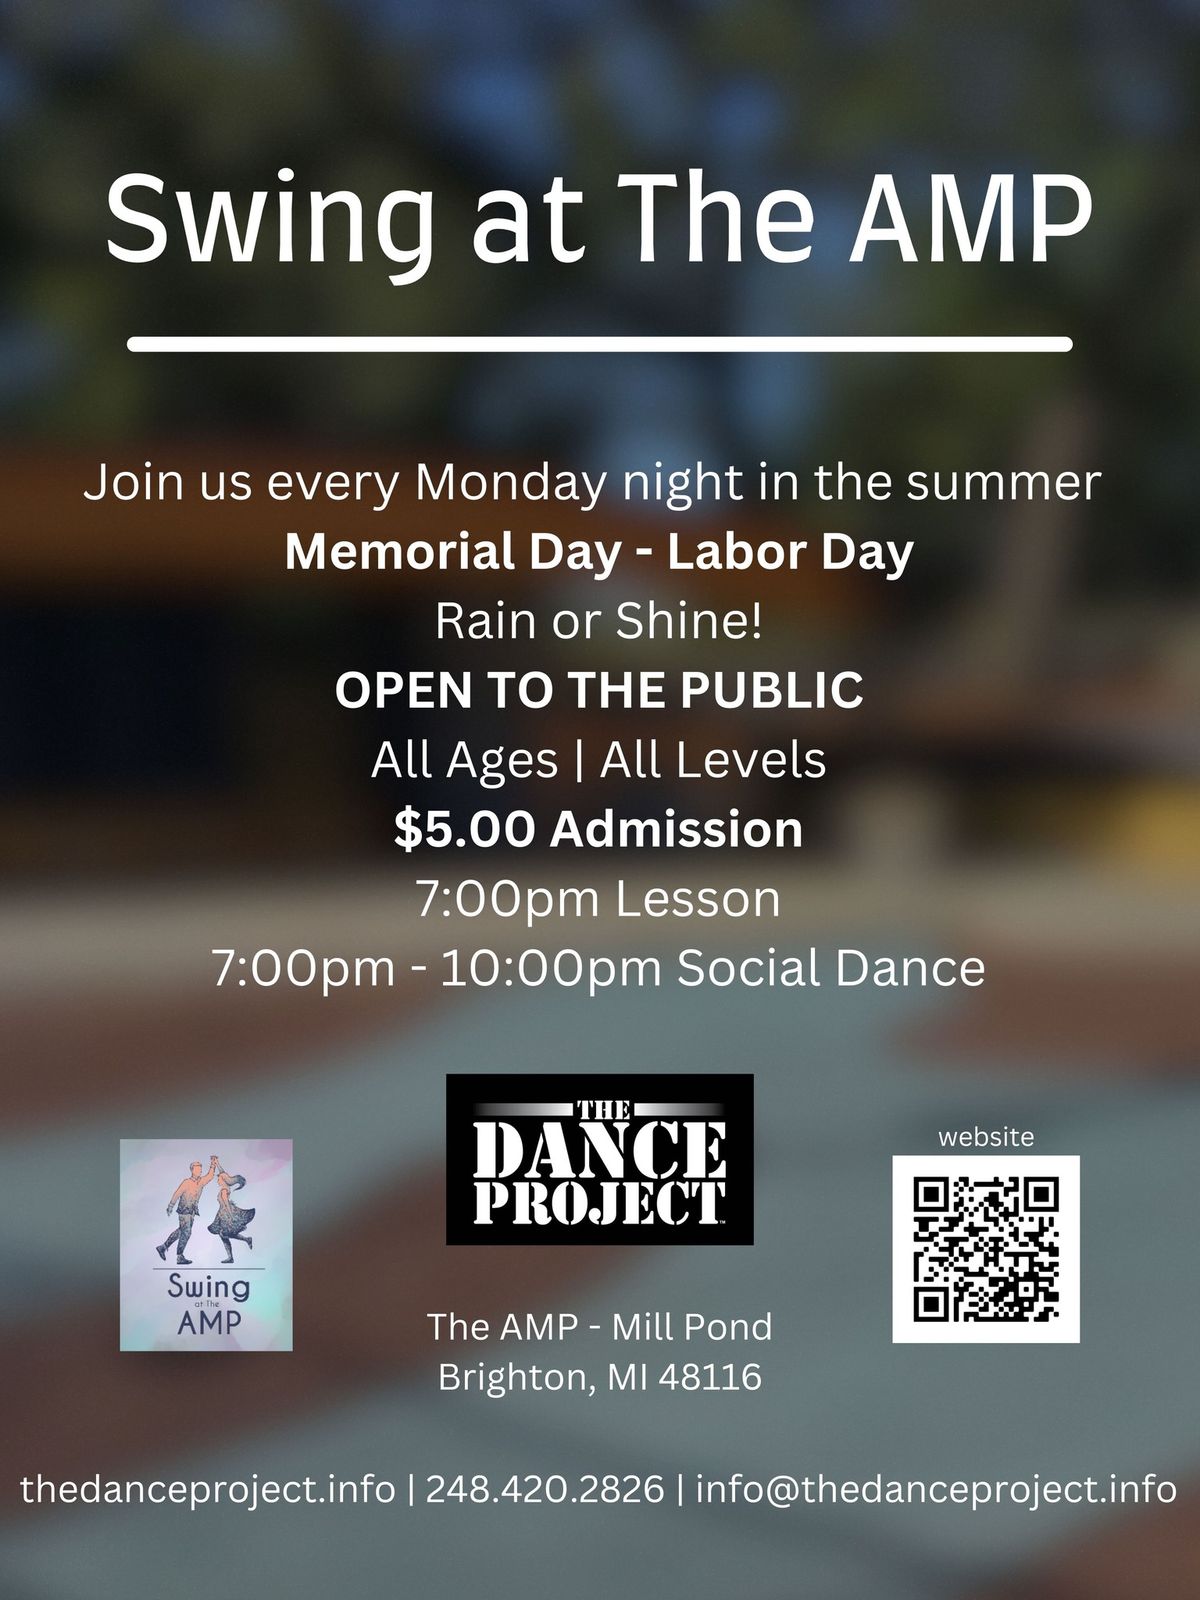 Swing at The AMP